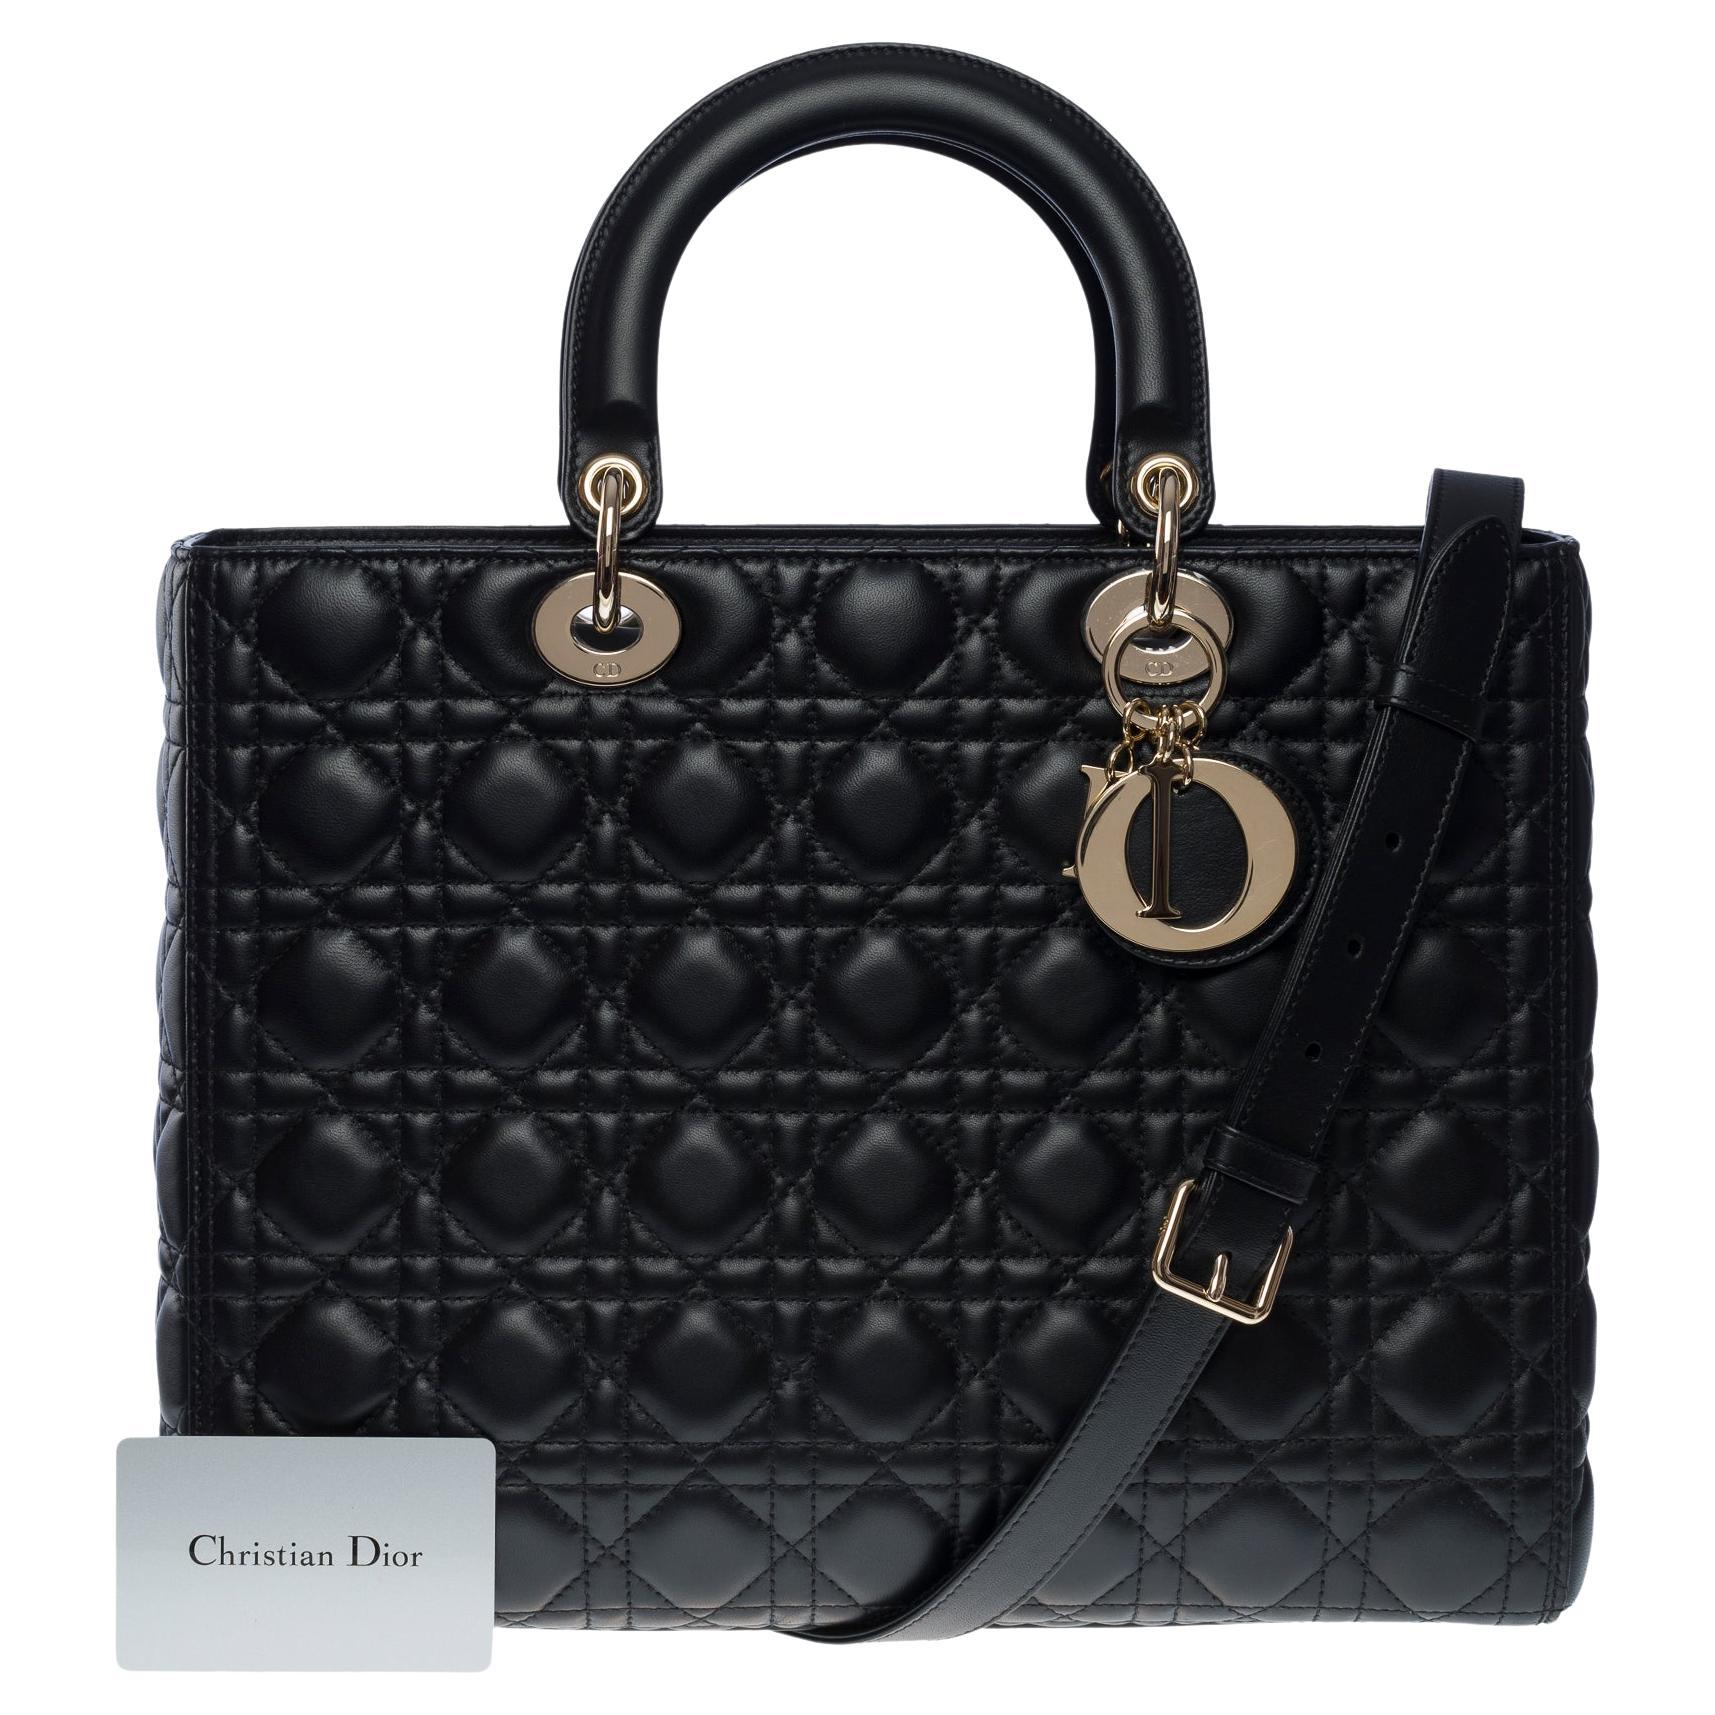  Lady Dior GM ( large size) shoulder bag with strap in black cannage leather,SHW